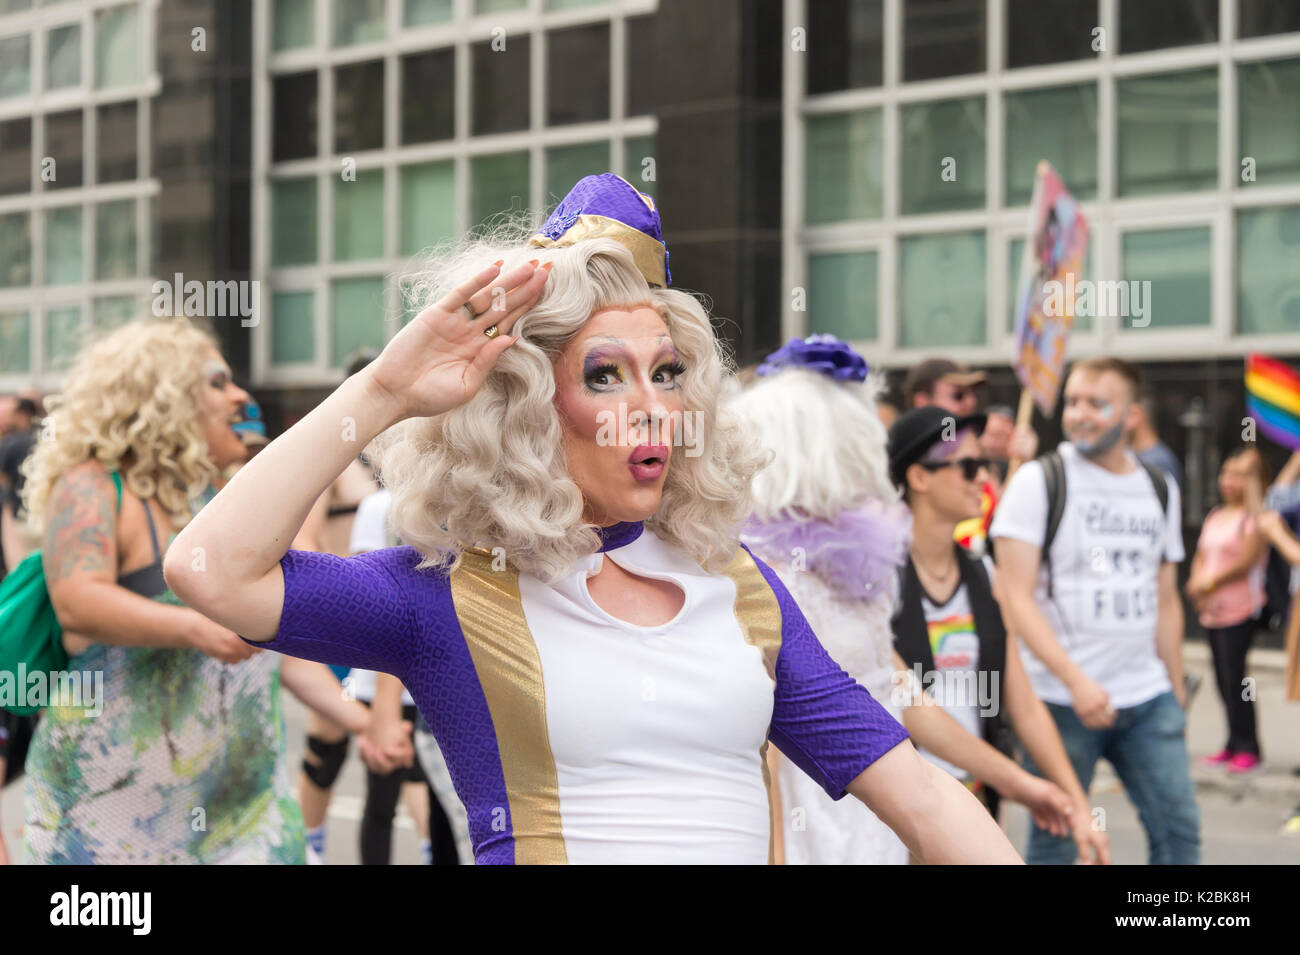 Montreal, 20 August 2017: Drag queen taking part in Montreal Gay Pride Parade Stock Photo